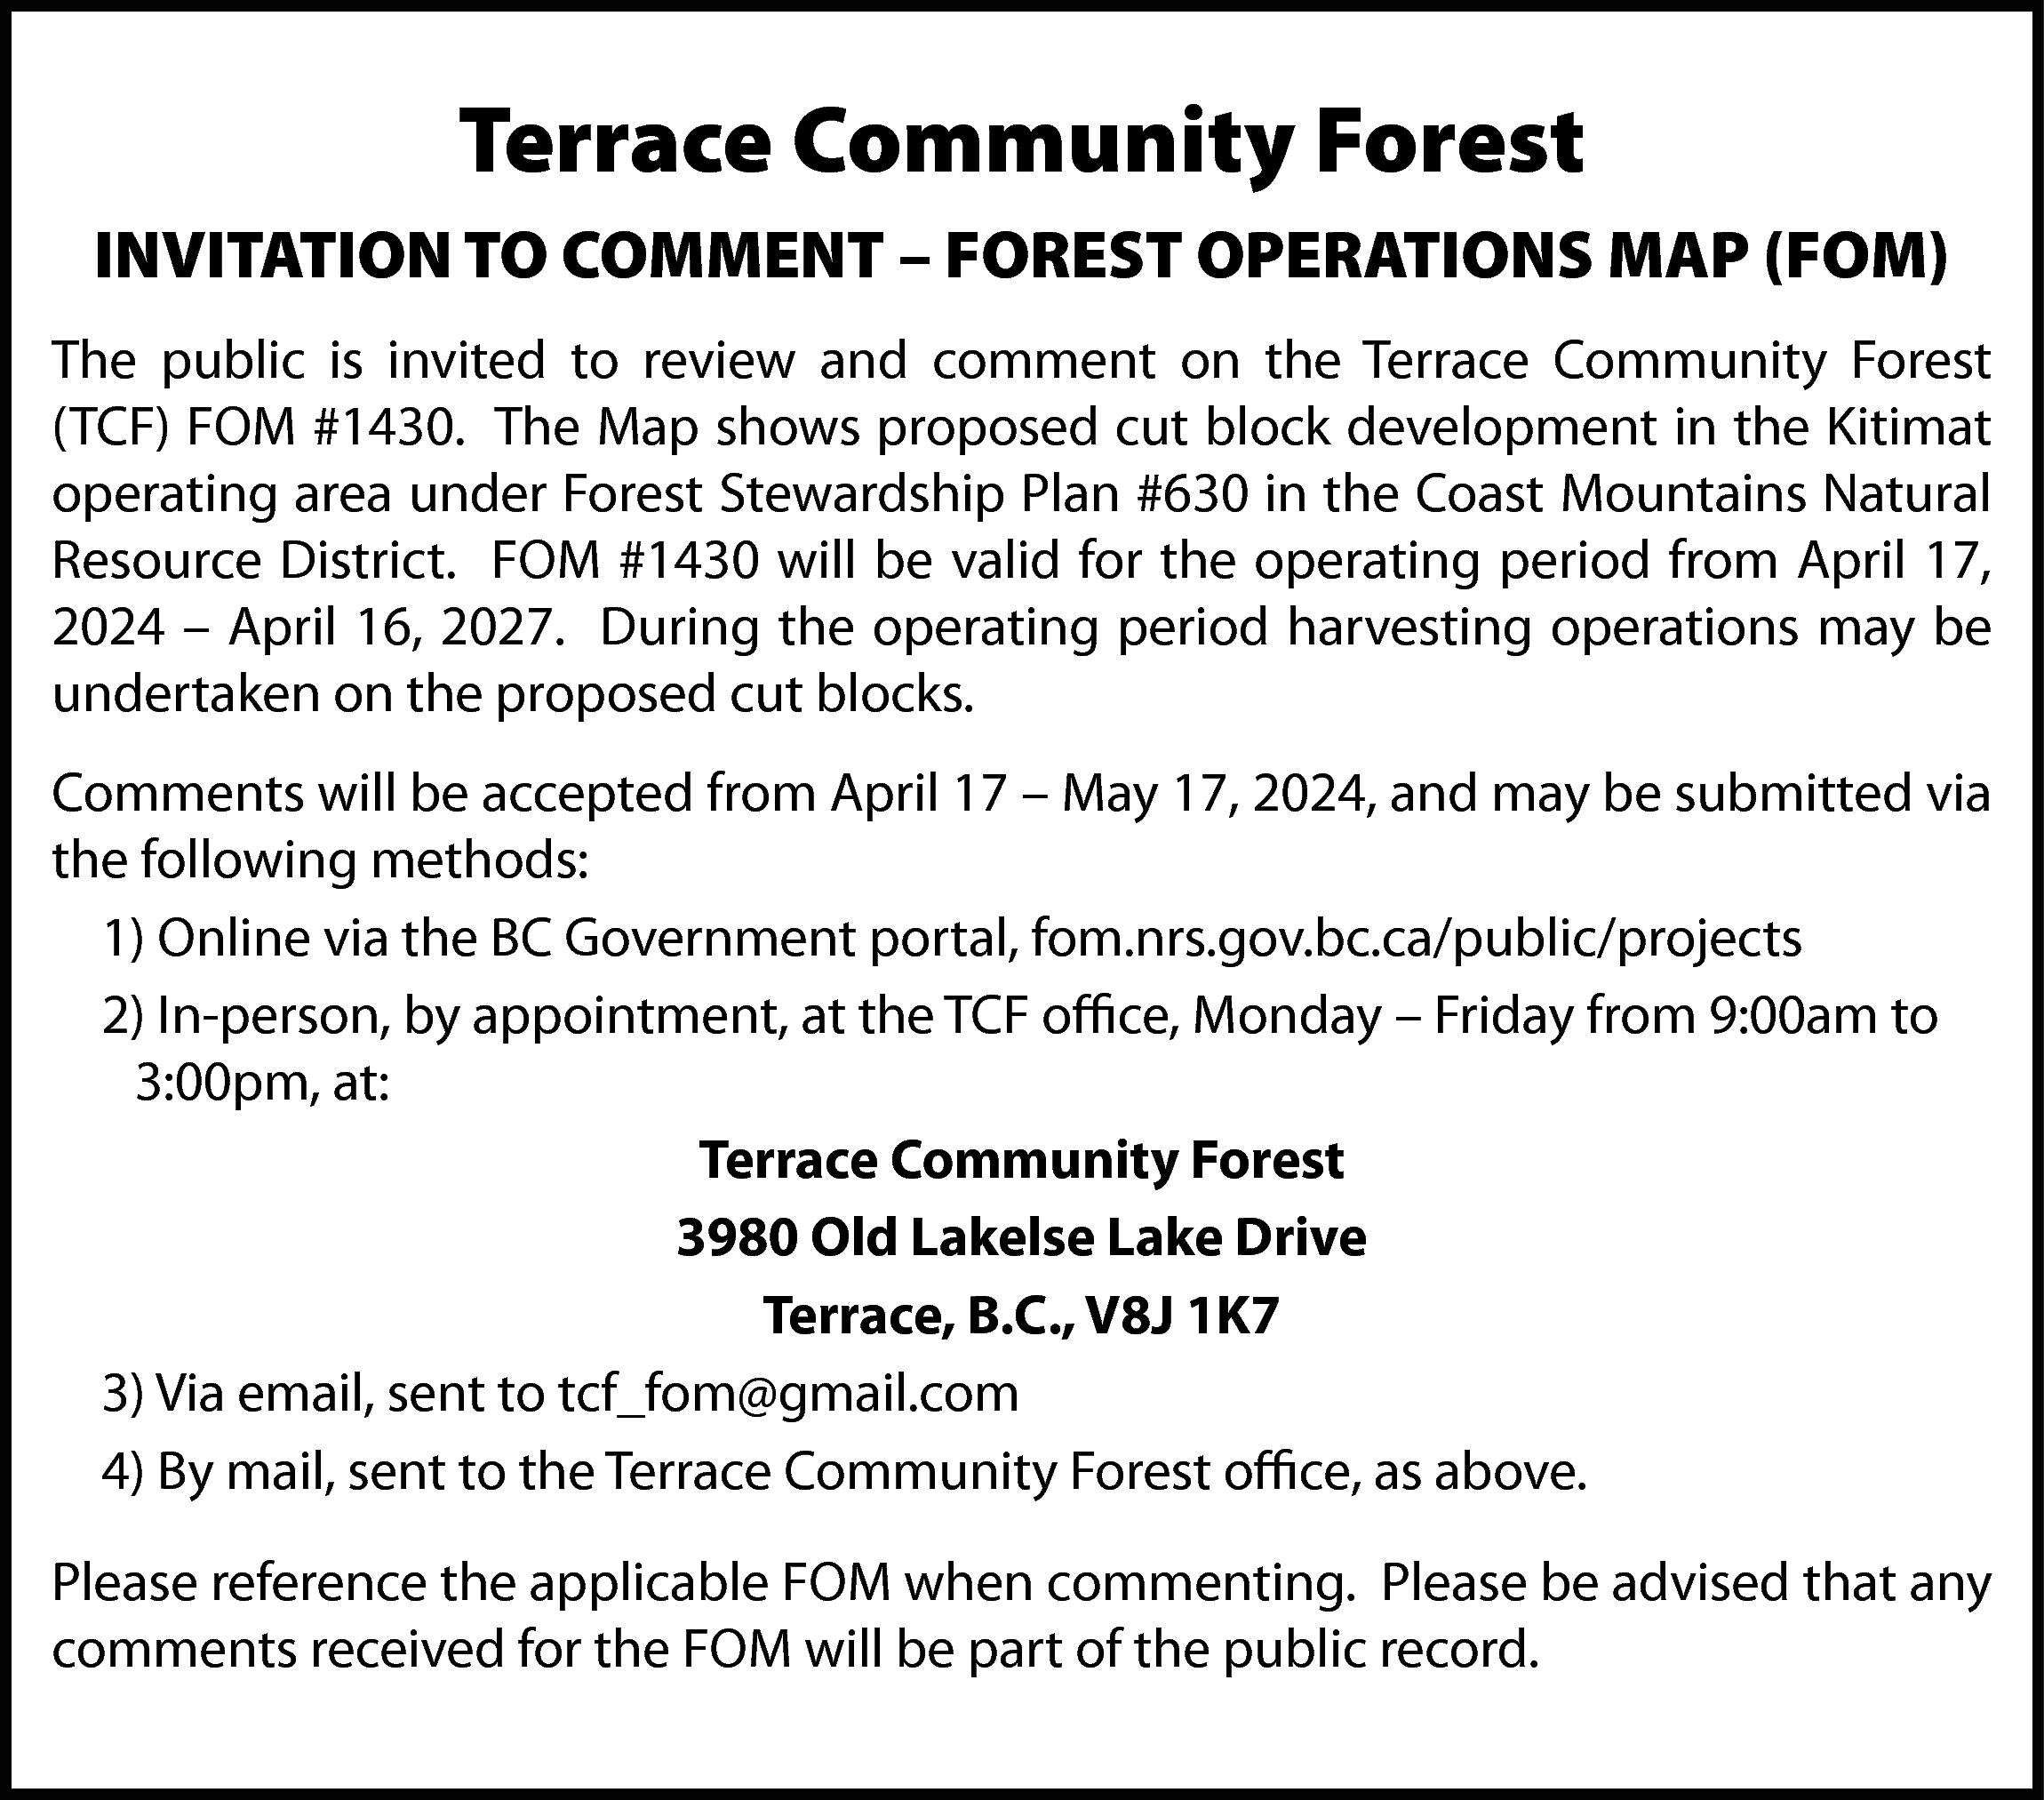 Terrace Community Forest <br>INVITATION TO  Terrace Community Forest  INVITATION TO COMMENT – FOREST OPERATIONS MAP (FOM)  The public is invited to review and comment on the Terrace Community Forest  (TCF) FOM #1430. The Map shows proposed cut block development in the Kitimat  operating area under Forest Stewardship Plan #630 in the Coast Mountains Natural  Resource District. FOM #1430 will be valid for the operating period from April 17,  2024 – April 16, 2027. During the operating period harvesting operations may be  undertaken on the proposed cut blocks.  Comments will be accepted from April 17 – May 17, 2024, and may be submitted via  the following methods:  1) Online via the BC Government portal, fom.nrs.gov.bc.ca/public/projects  2) In-person, by appointment, at the TCF office, Monday – Friday from 9:00am to  3:00pm, at:  Terrace Community Forest  3980 Old Lakelse Lake Drive  Terrace, B.C., V8J 1K7  3) Via email, sent to tcf_fom@gmail.com  4) By mail, sent to the Terrace Community Forest office, as above.  Please reference the applicable FOM when commenting. Please be advised that any  comments received for the FOM will be part of the public record.    